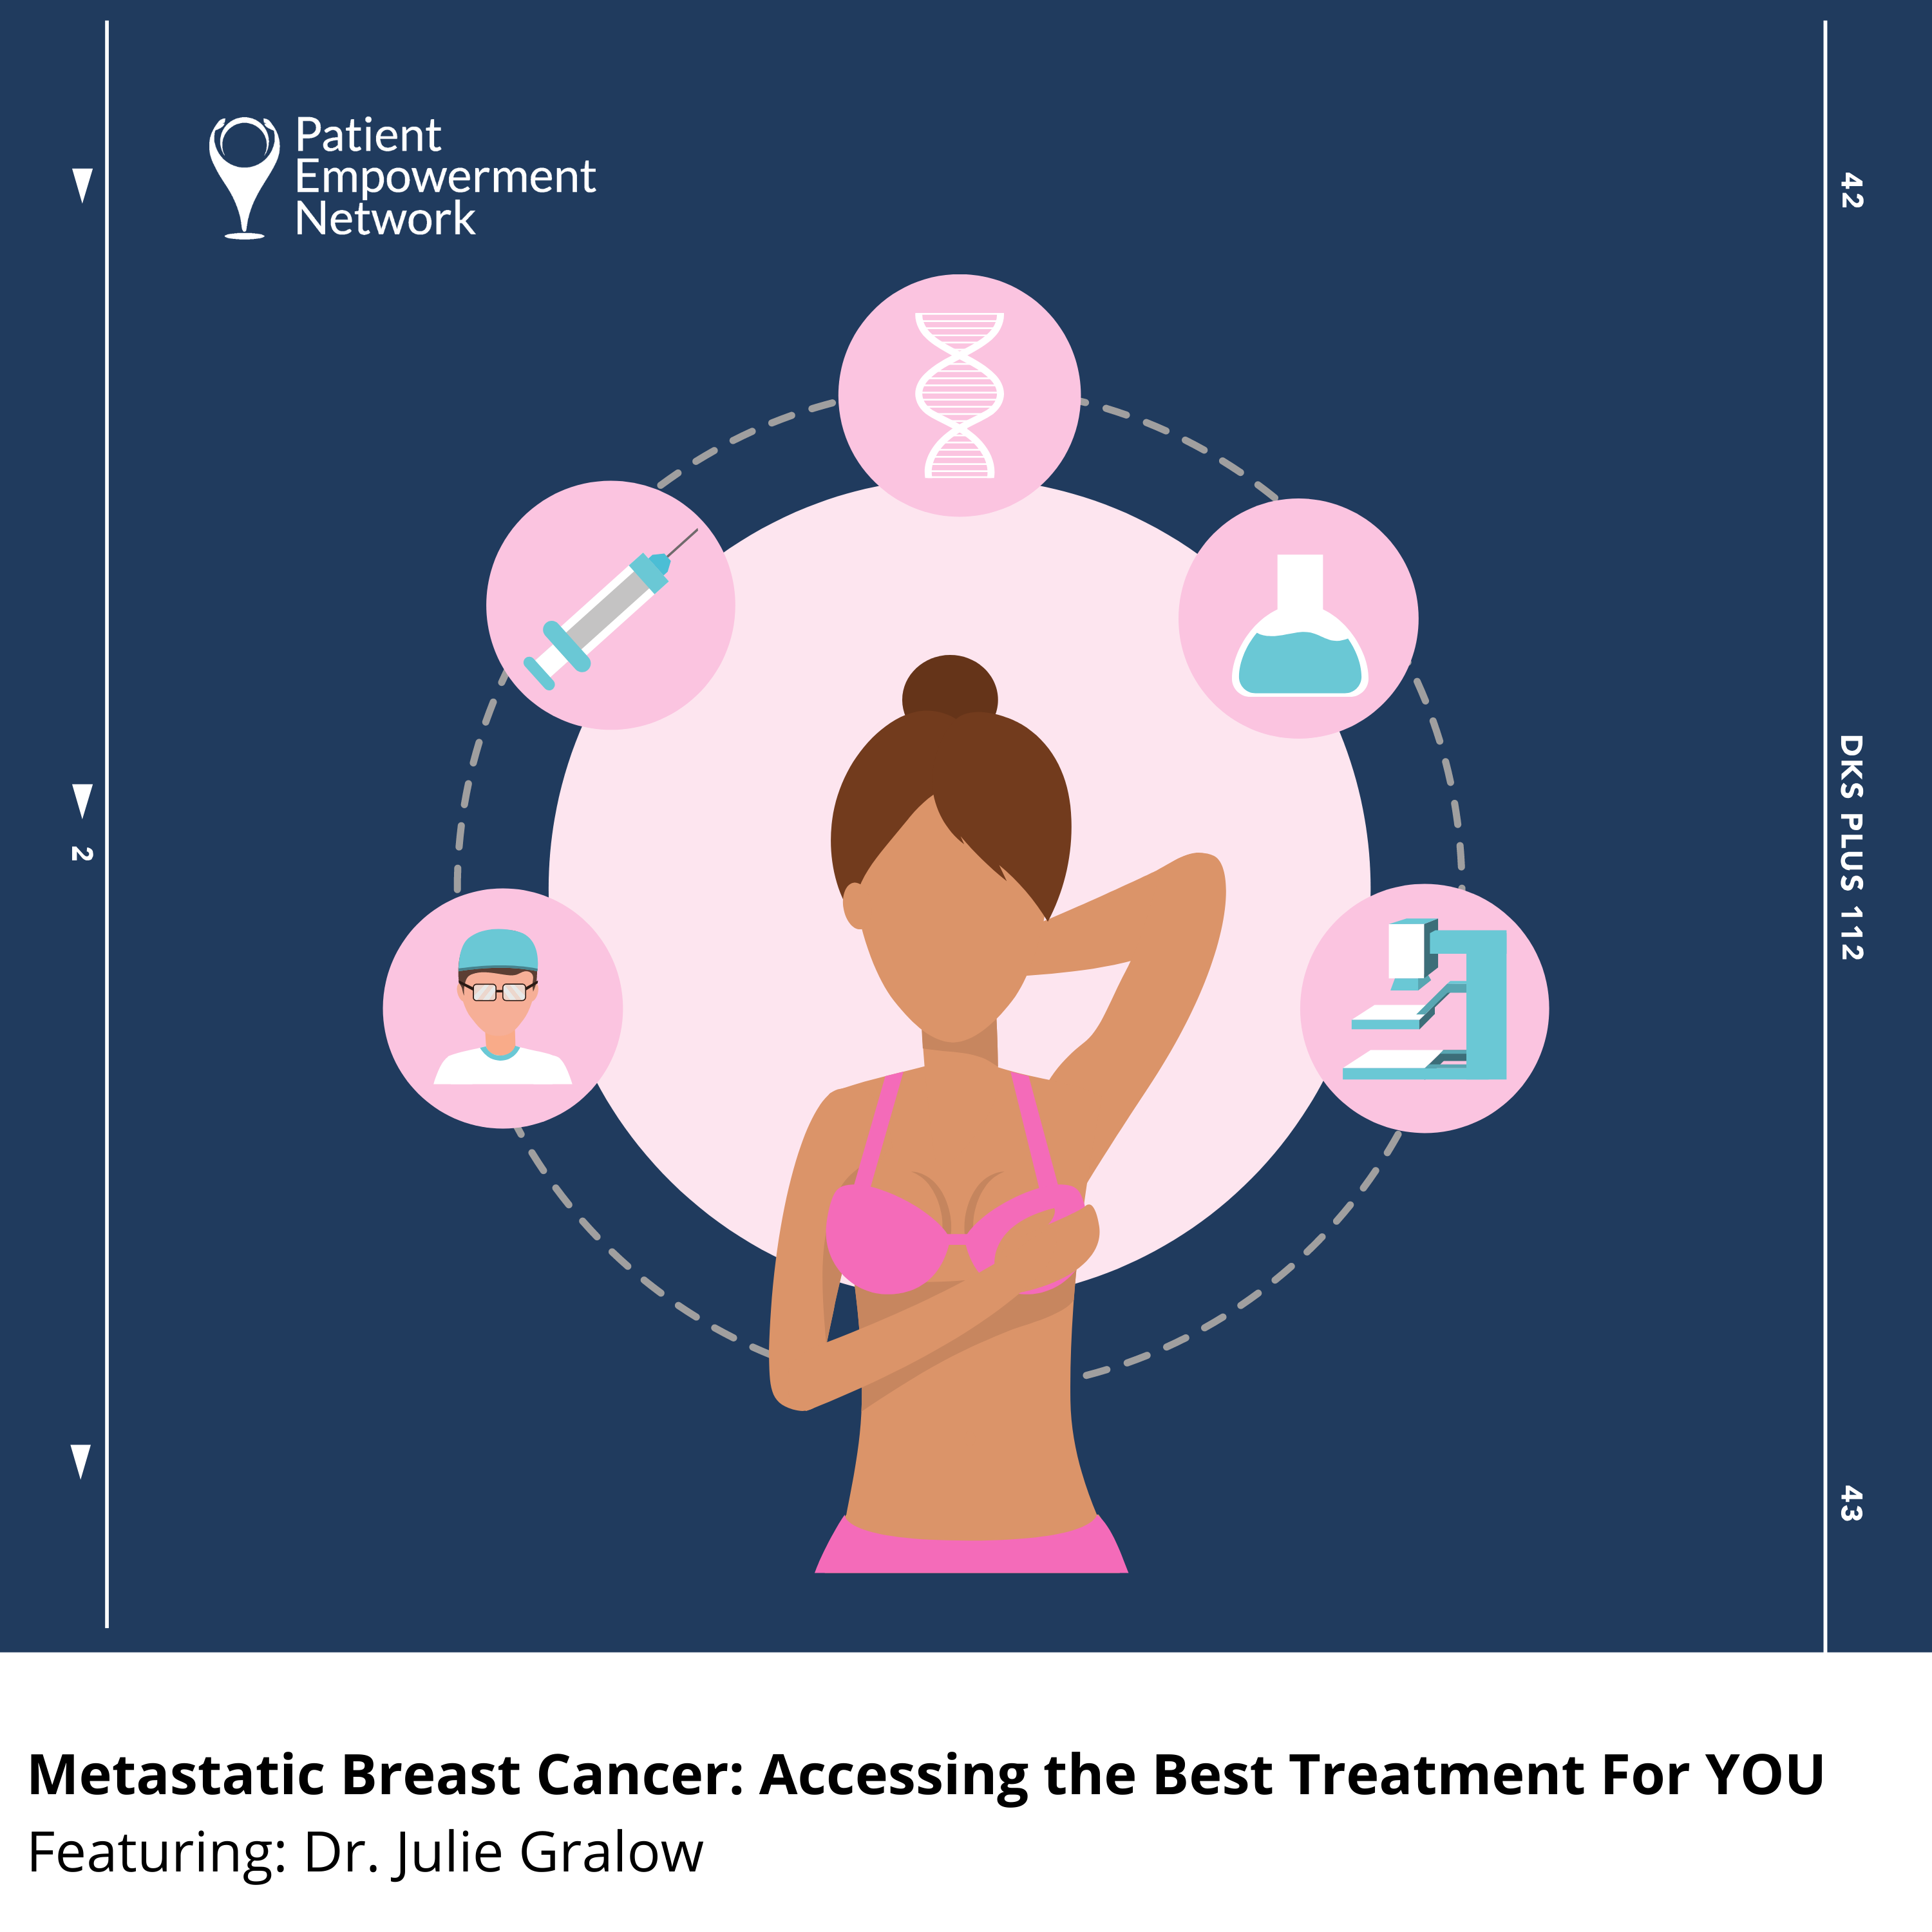 https://powerfulpatients.org/wp-content/uploads/Metastatic-Breast-Cancer-Accessing-the-Best-Treatment-For-YOU.png